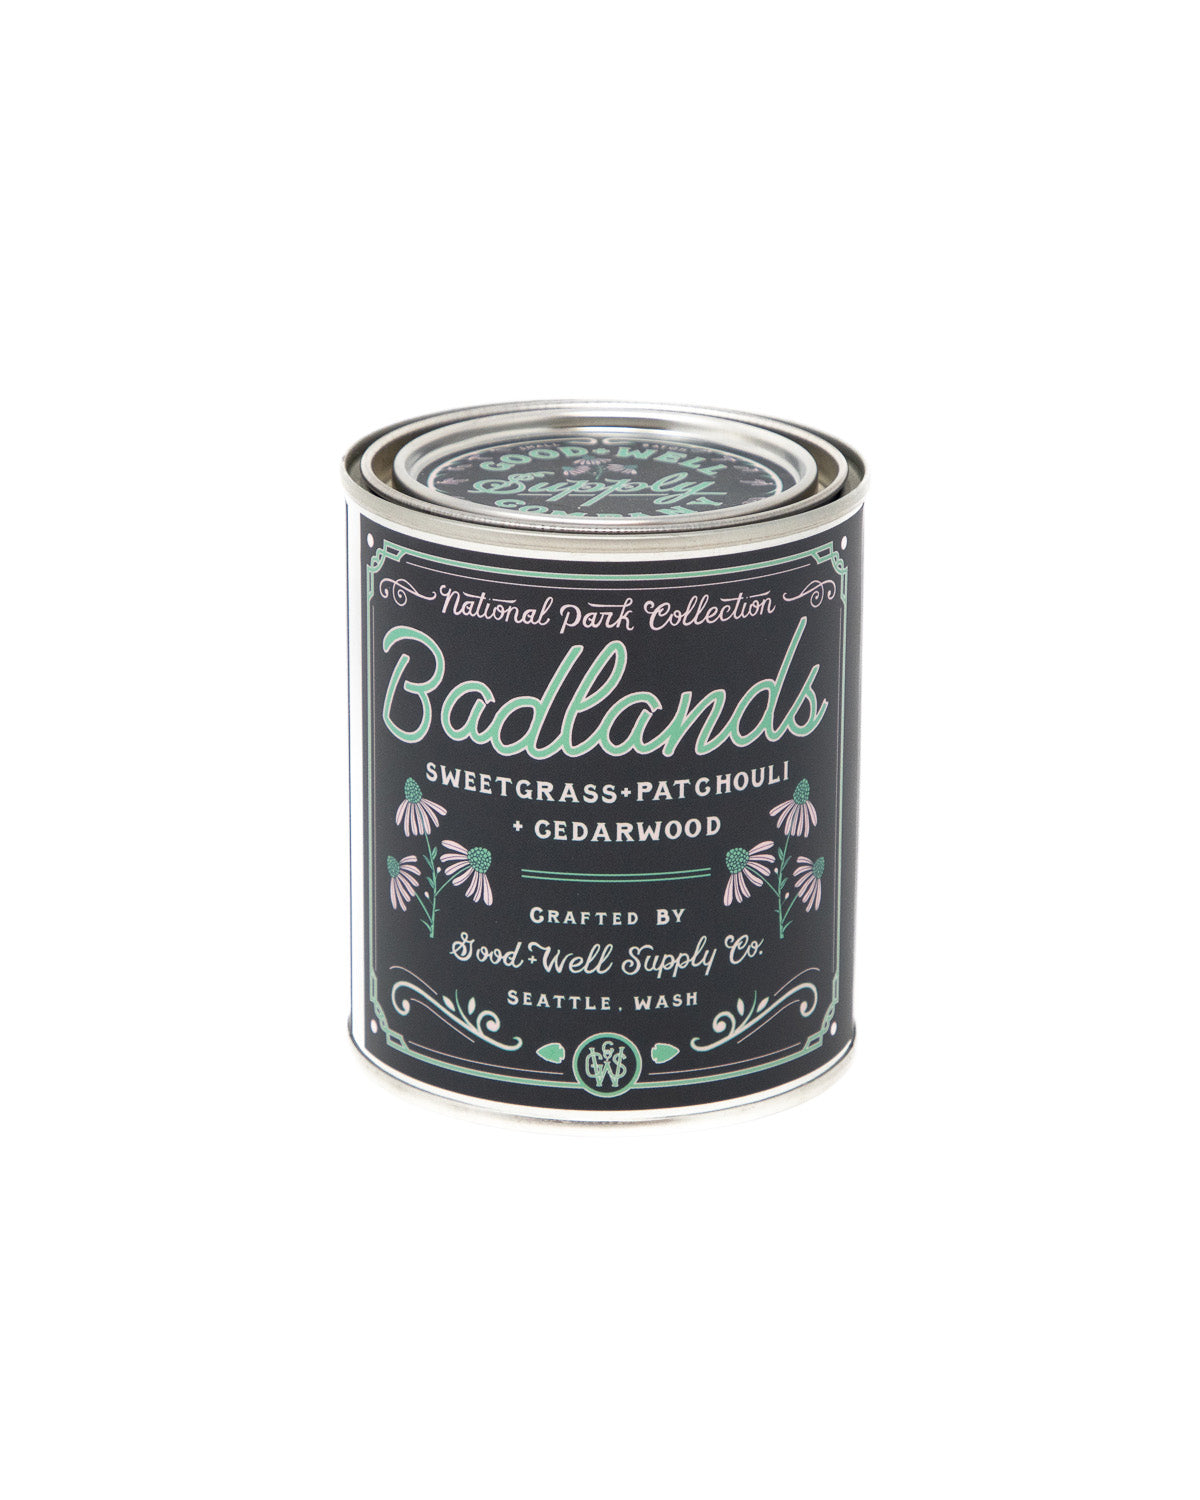 Good & Well Supply Co Badlands National Park Candle 8 oz Home accessories